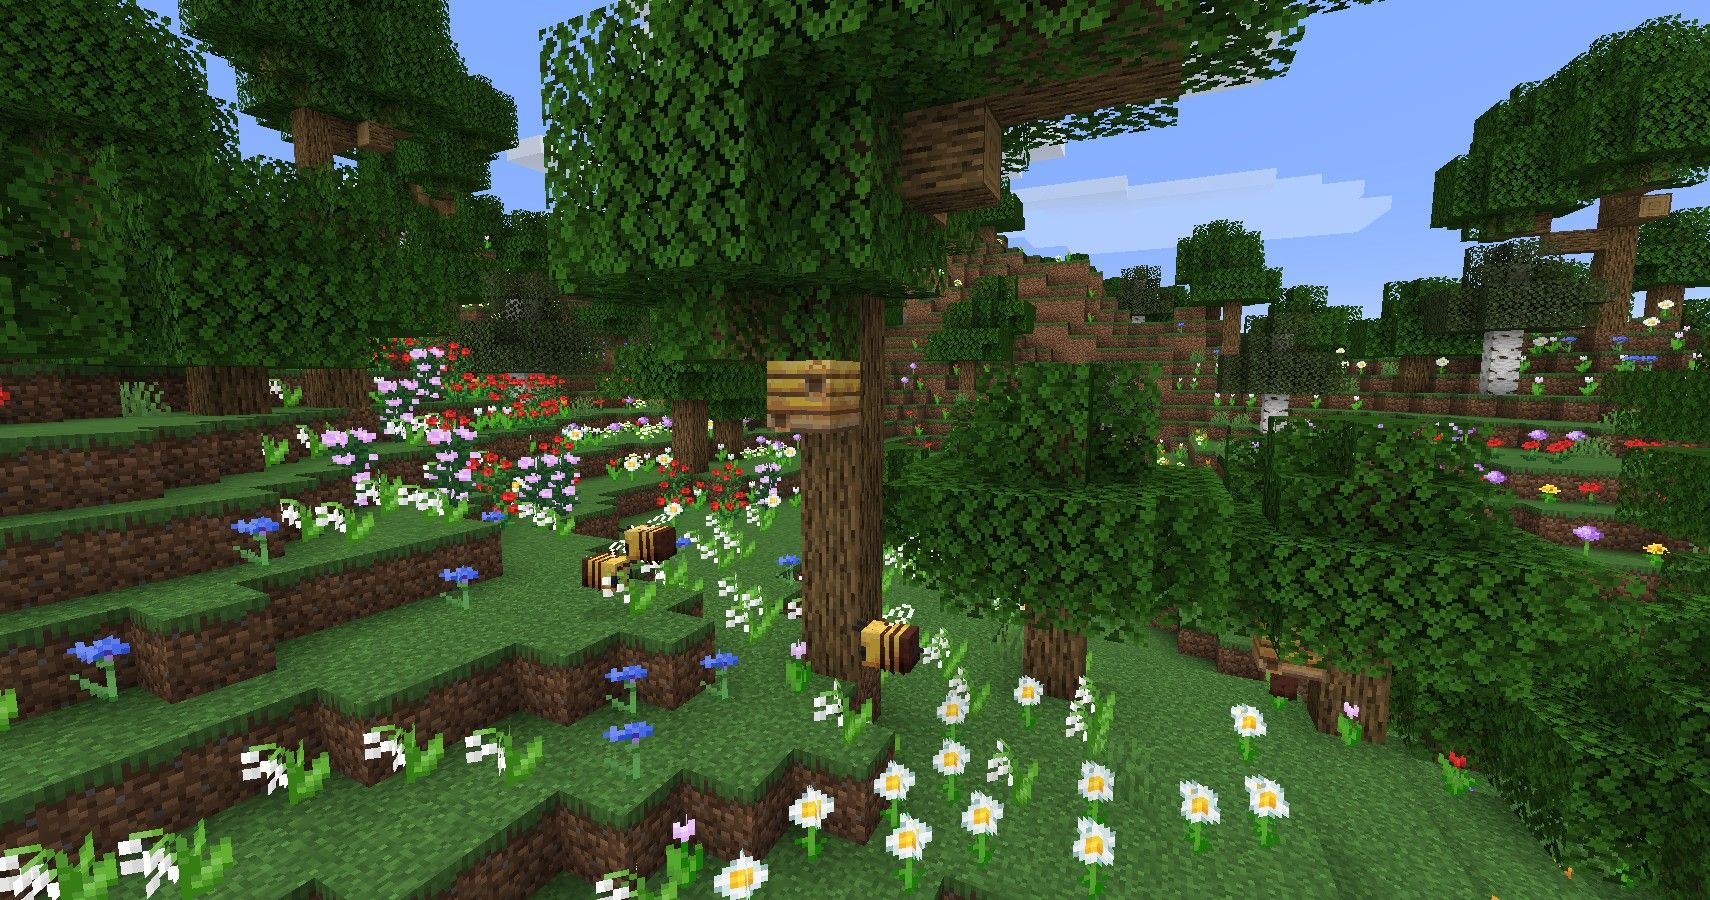 Bees around a bees nest in a forest full of flowers 